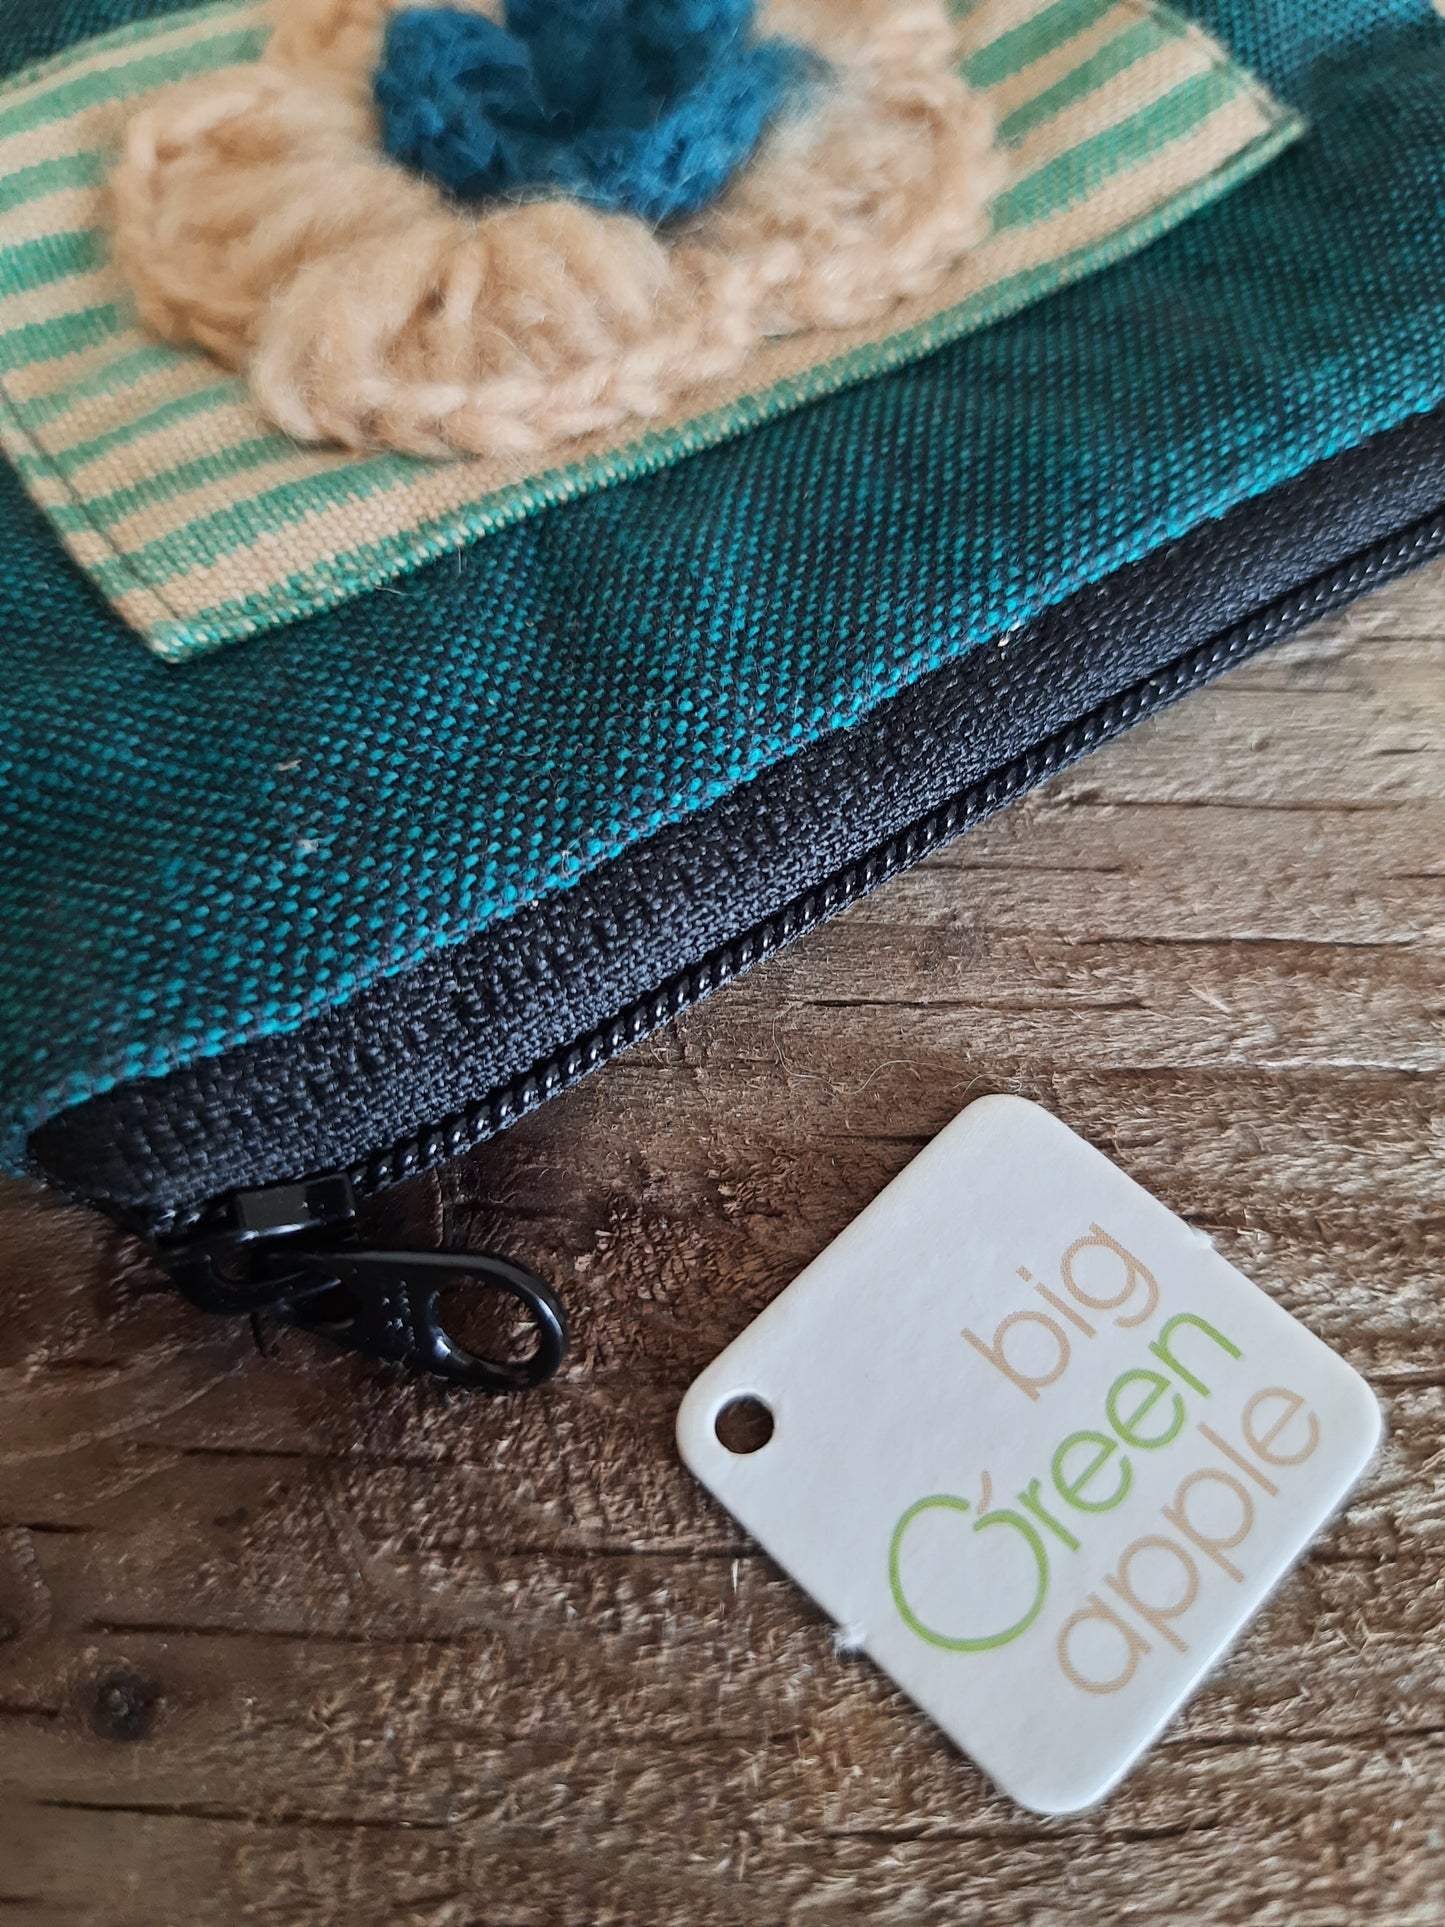 Fair Trade Purses | Eco Friendly Gift Ideas | Ethically Sourced | Sustainable Gifts